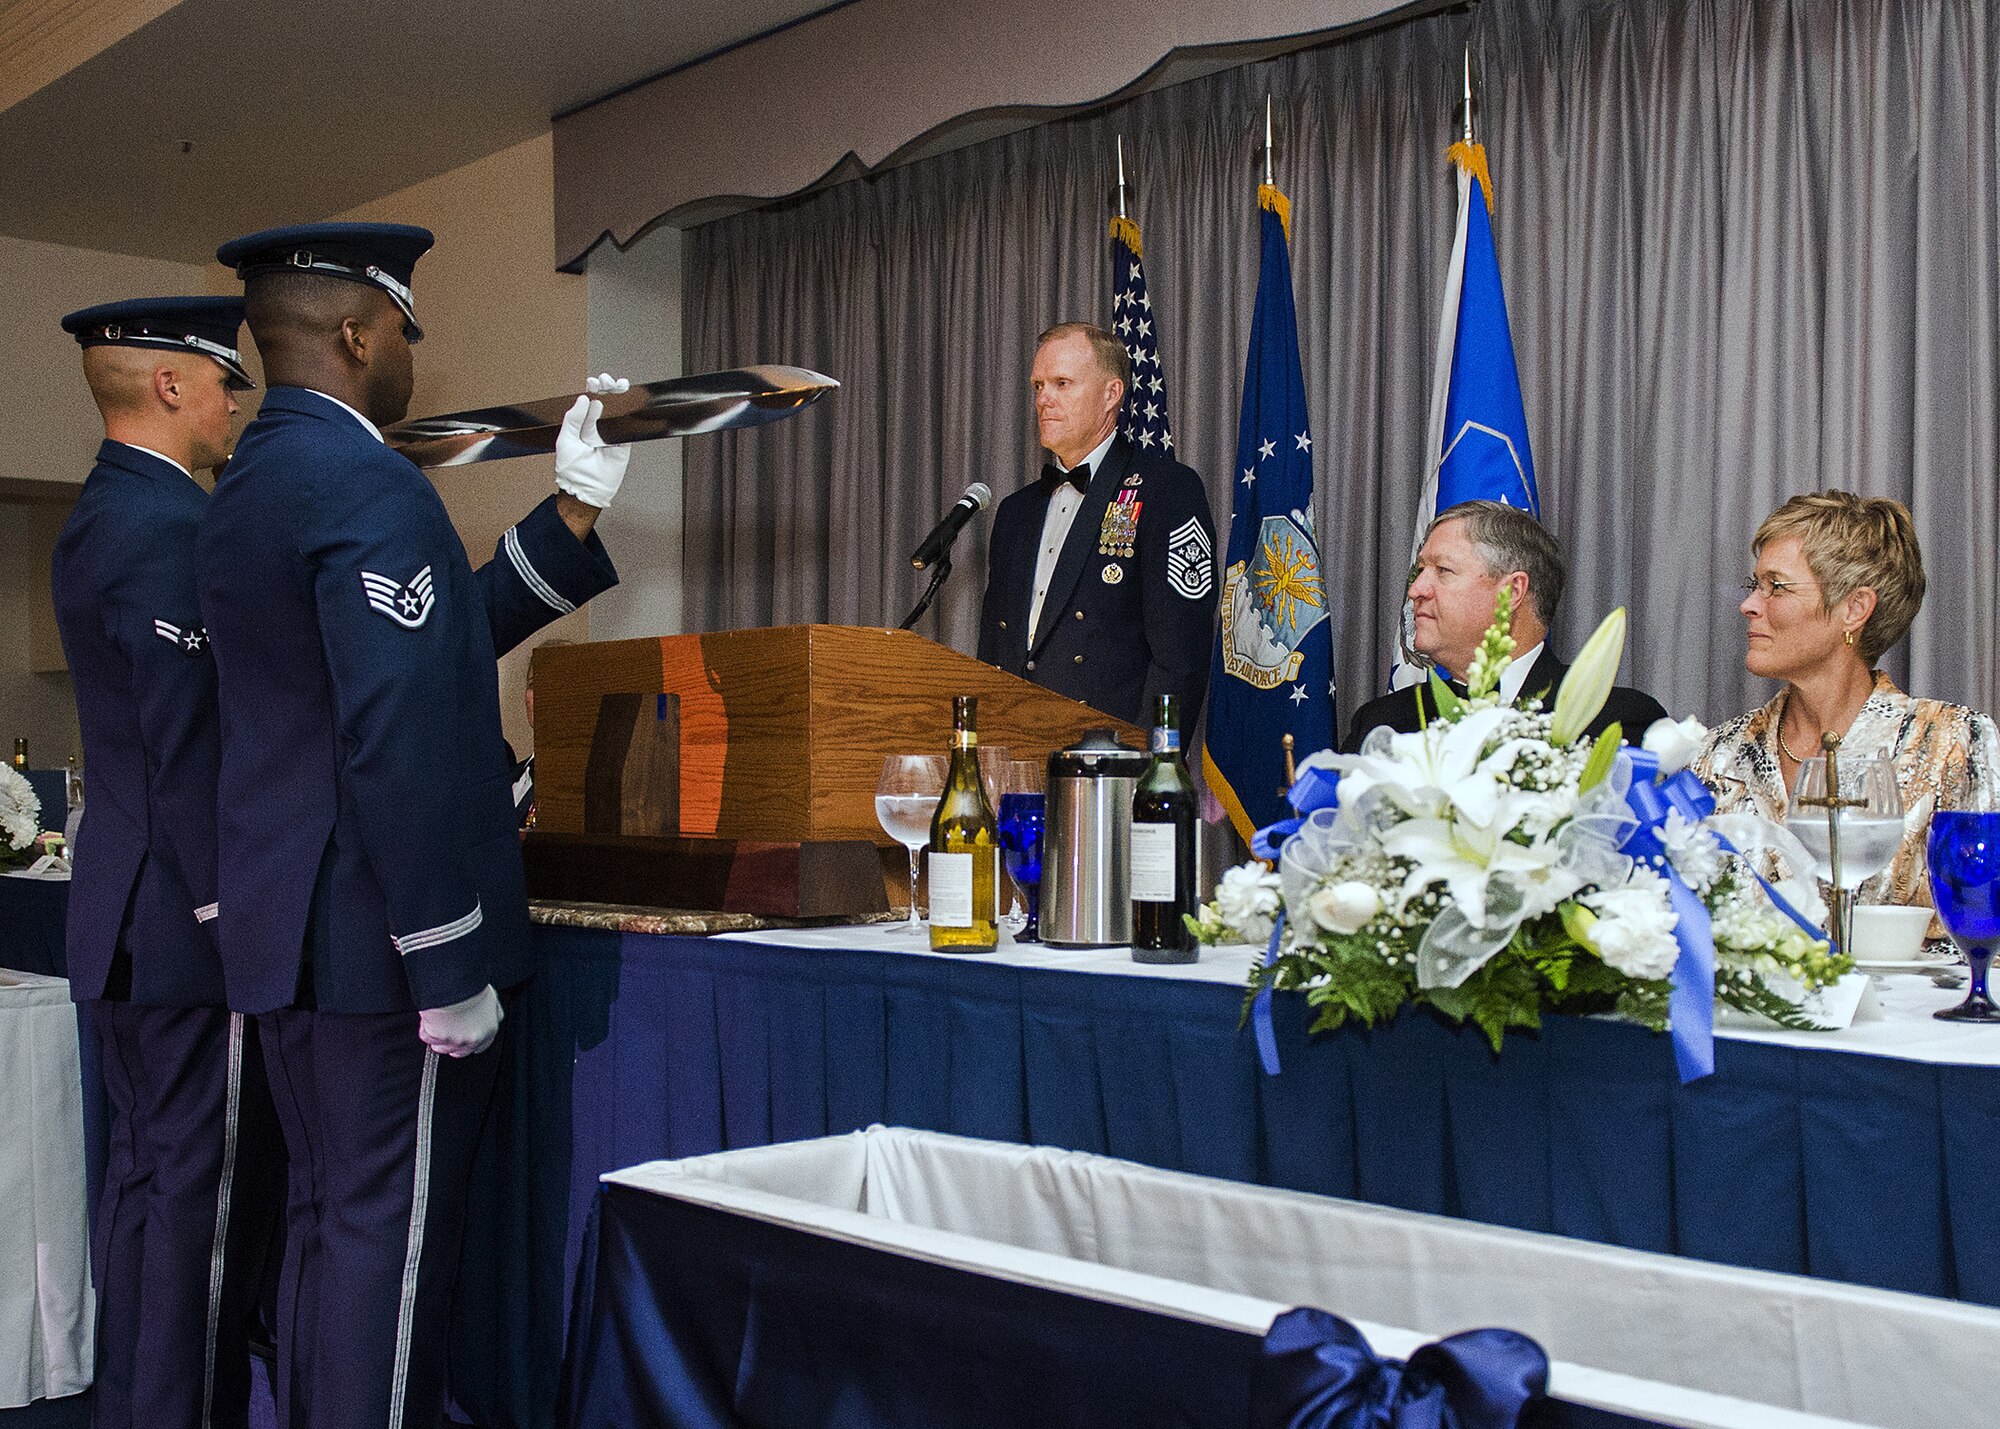 Chief Master Sgt. of the Air Force James Cody inducts the former Secretary of the Air Force Michael Donley into the Order of the Sword during a ceremony on Joint Base Anacostia Bolling, Washington, D.C. on Sept. 13, 2013. 